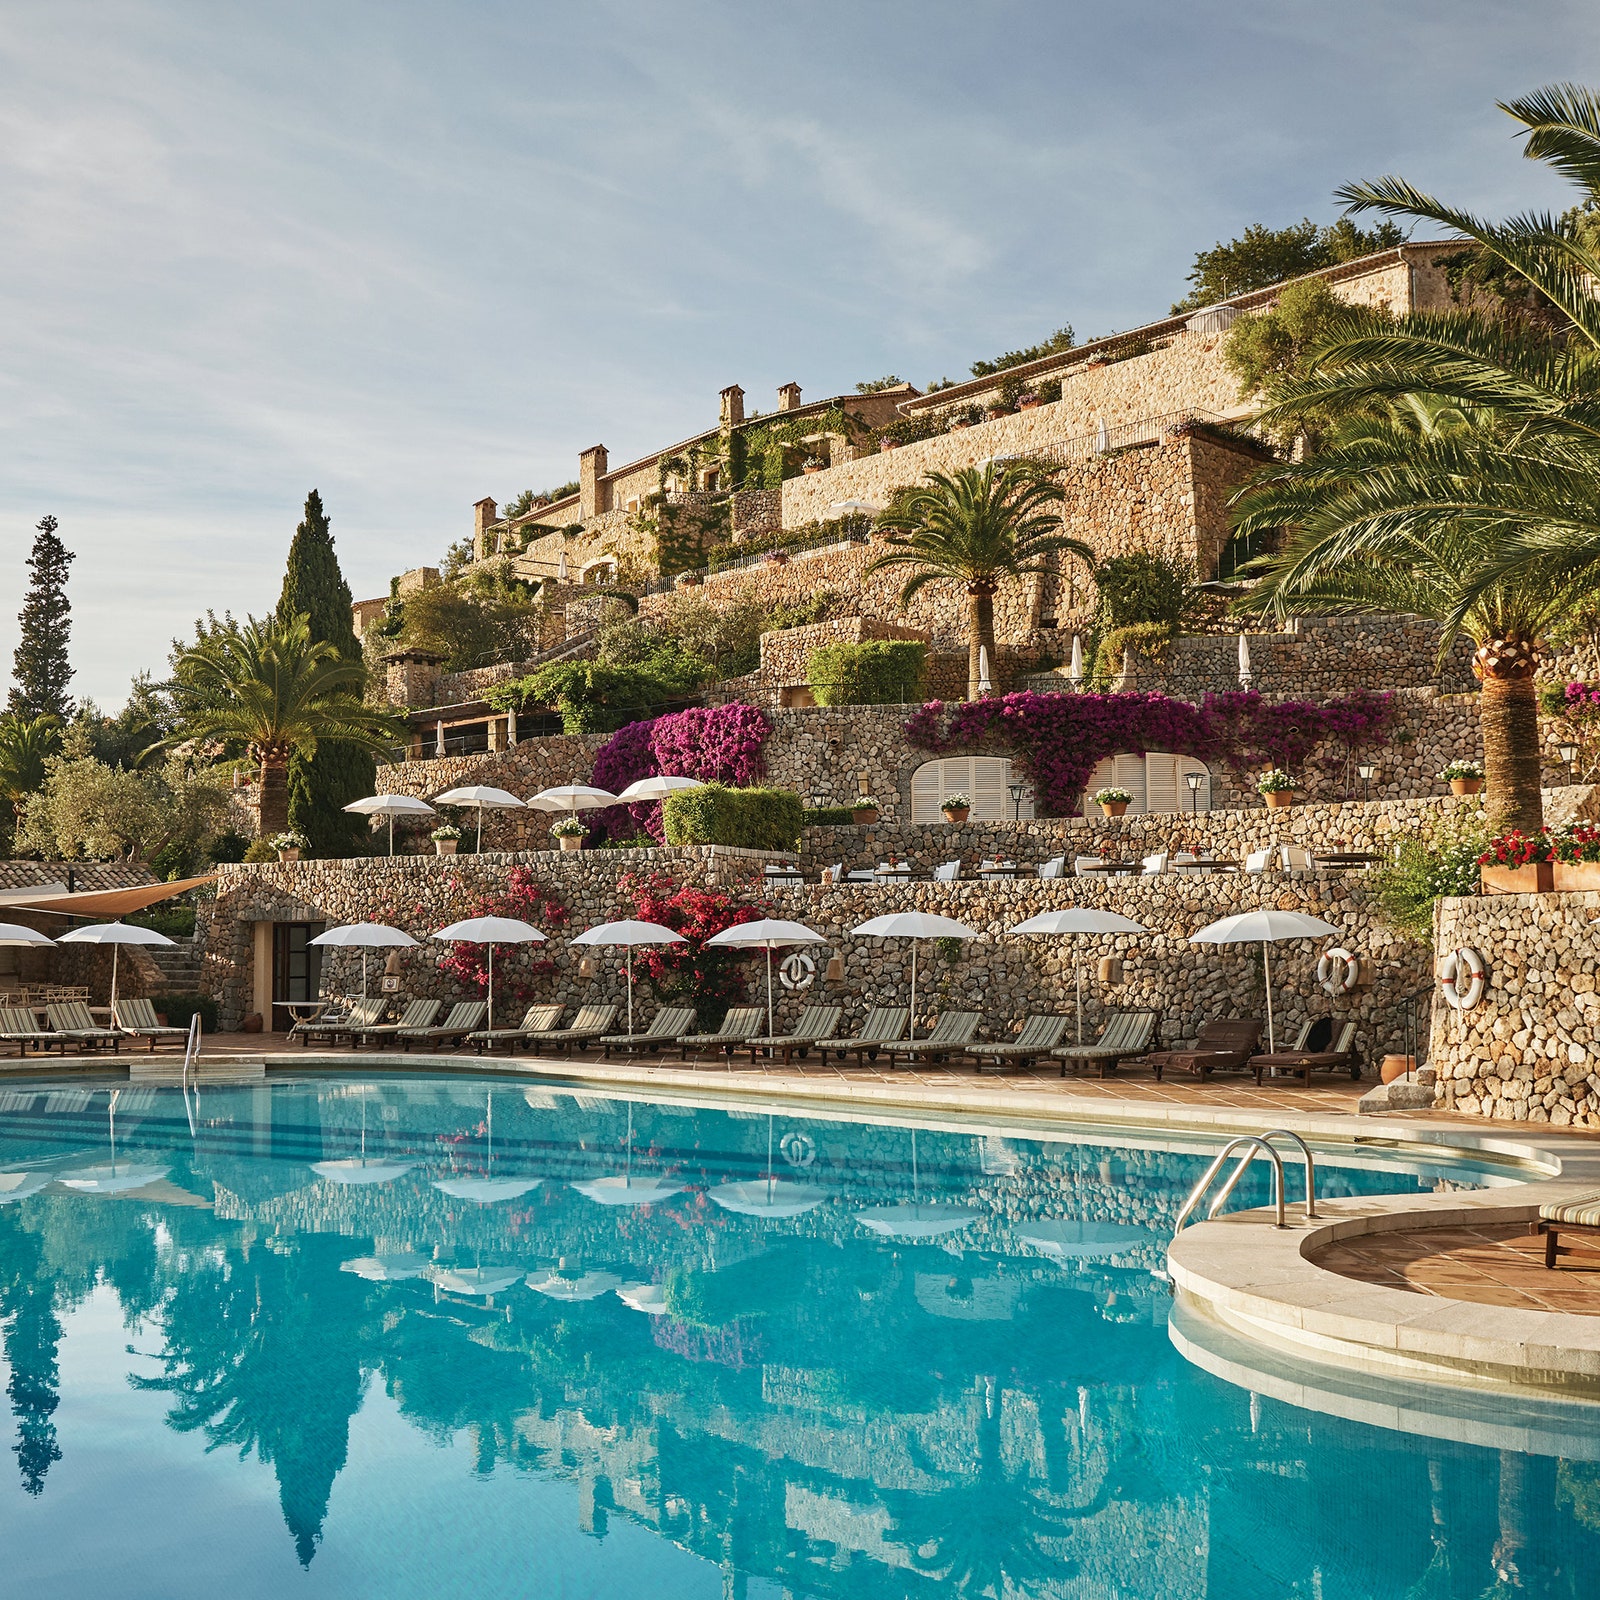 20 Picture-Perfect Hotels in Mallorca, From Historic Castles to Wellness Hotspots